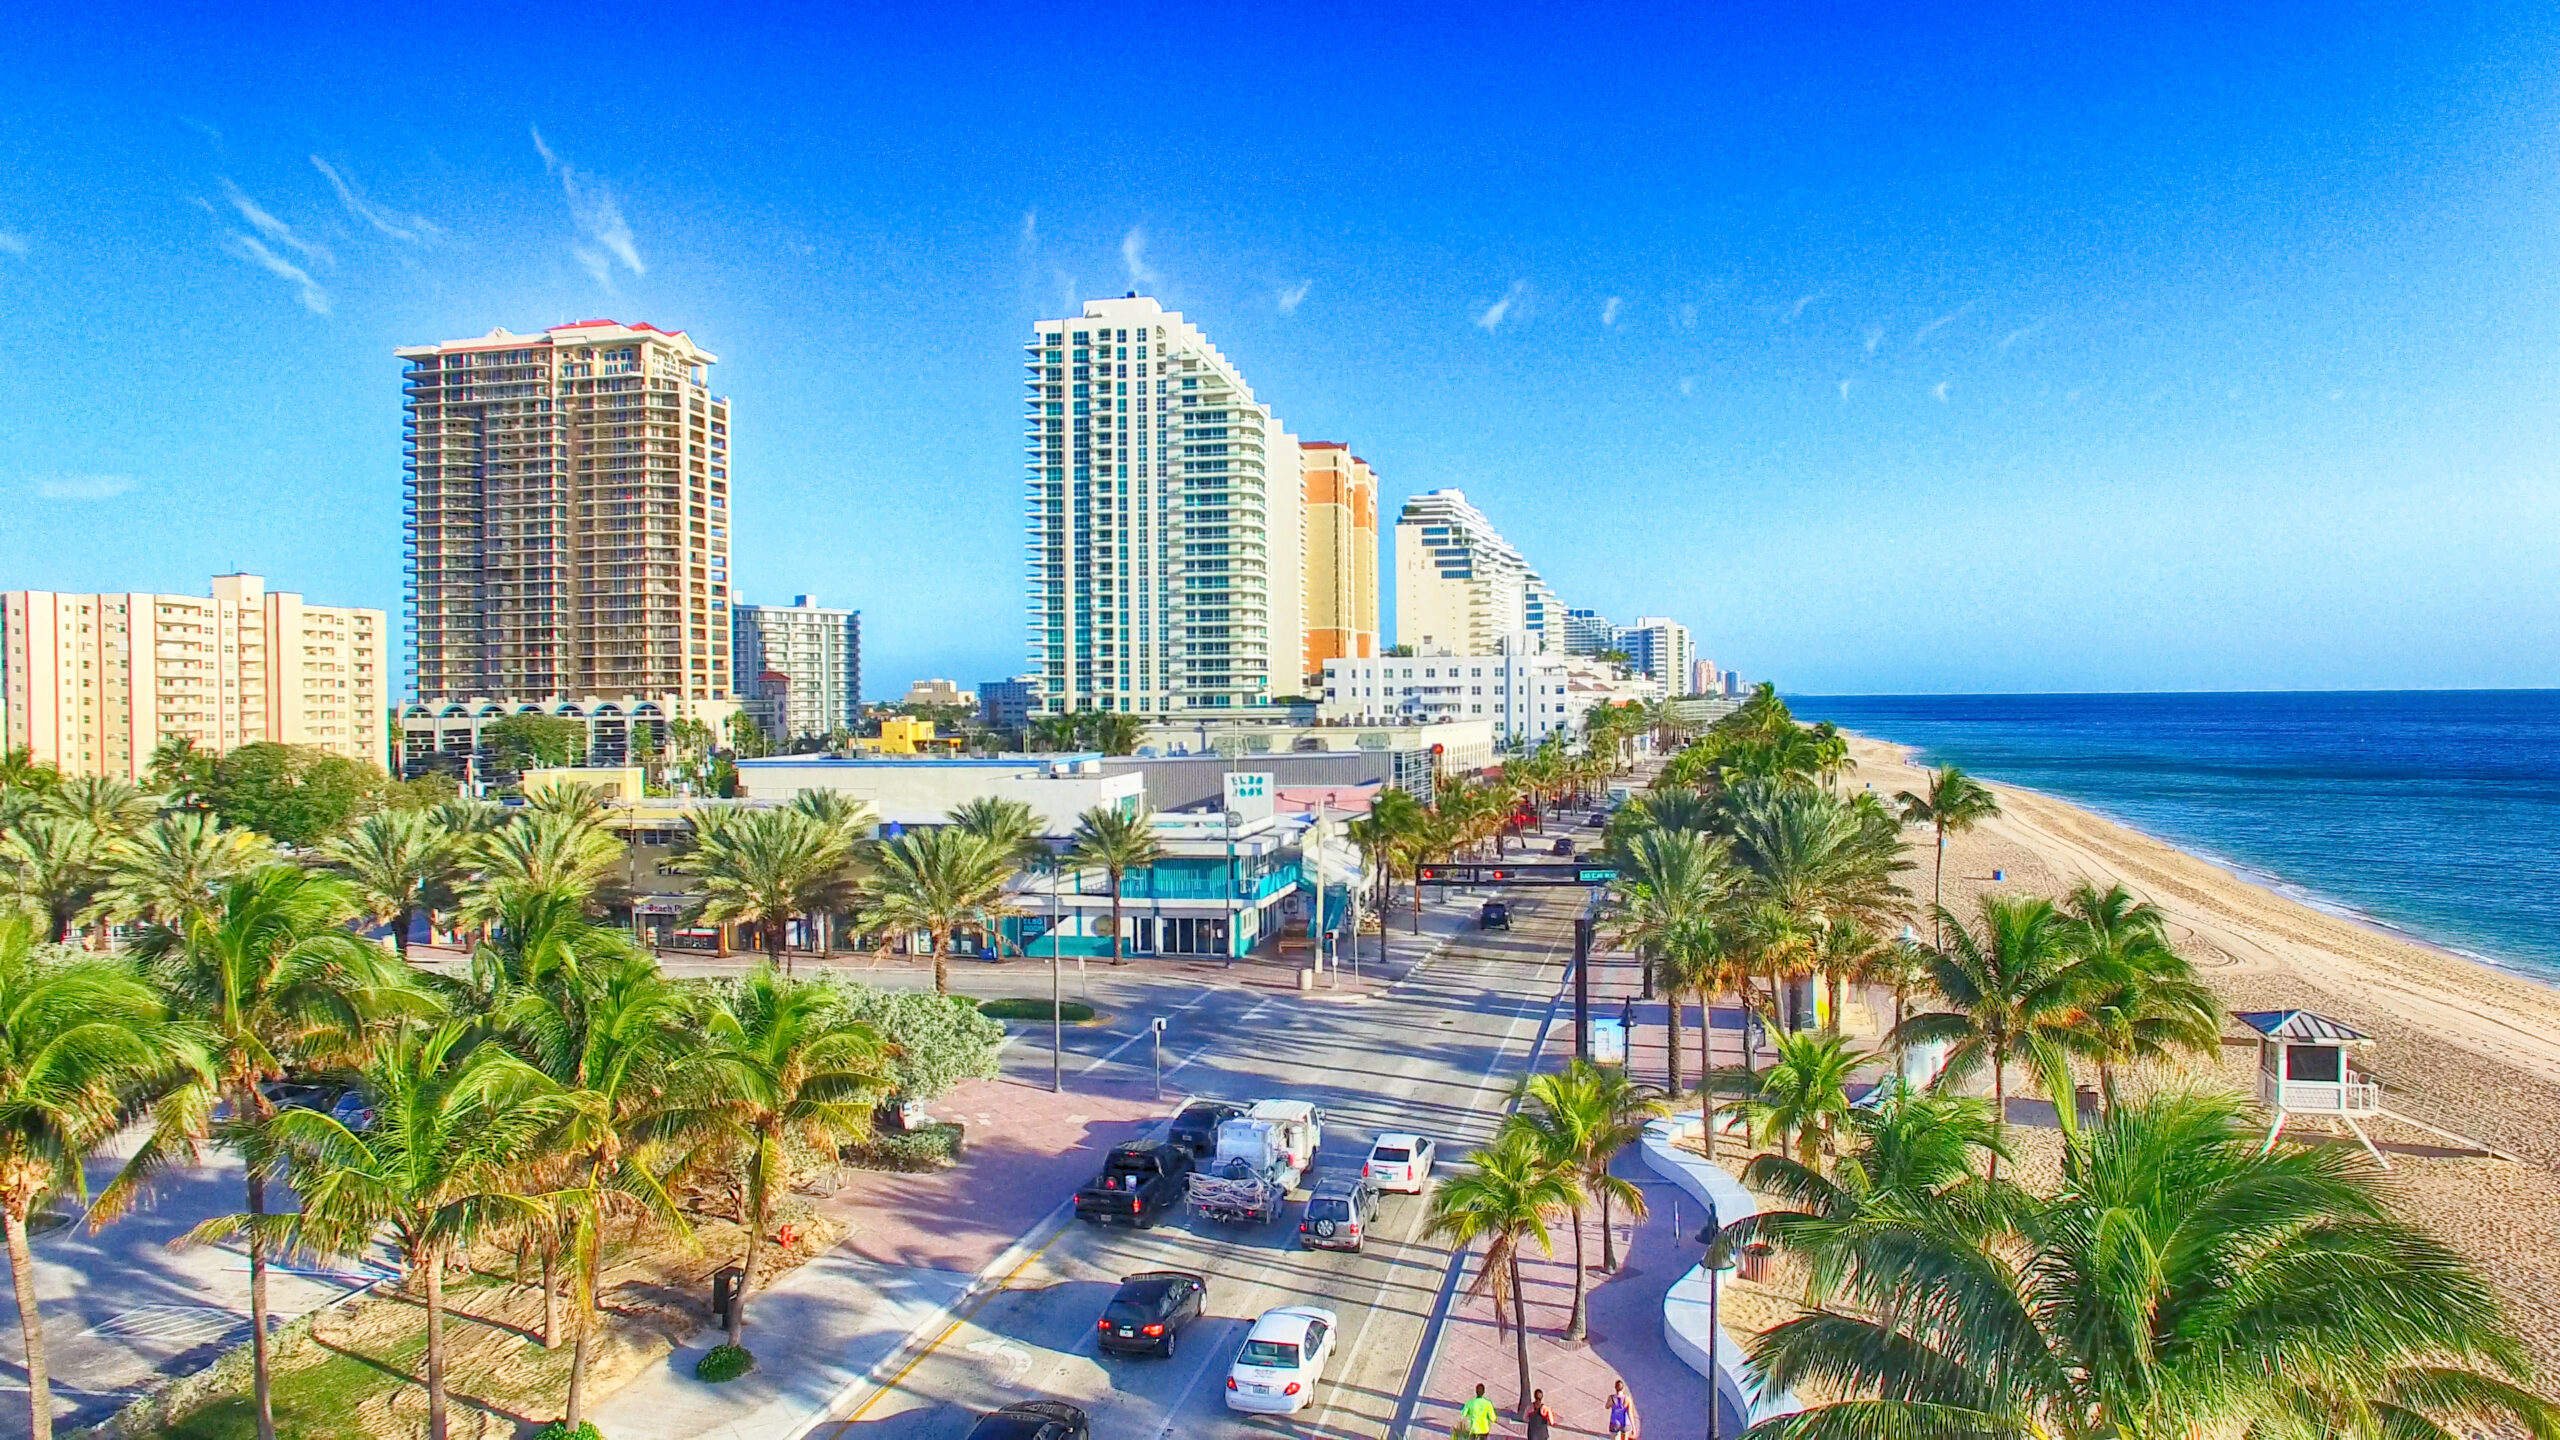 Fort Lauderdale (Photo Credit: pisaphotography / Shutterstock)